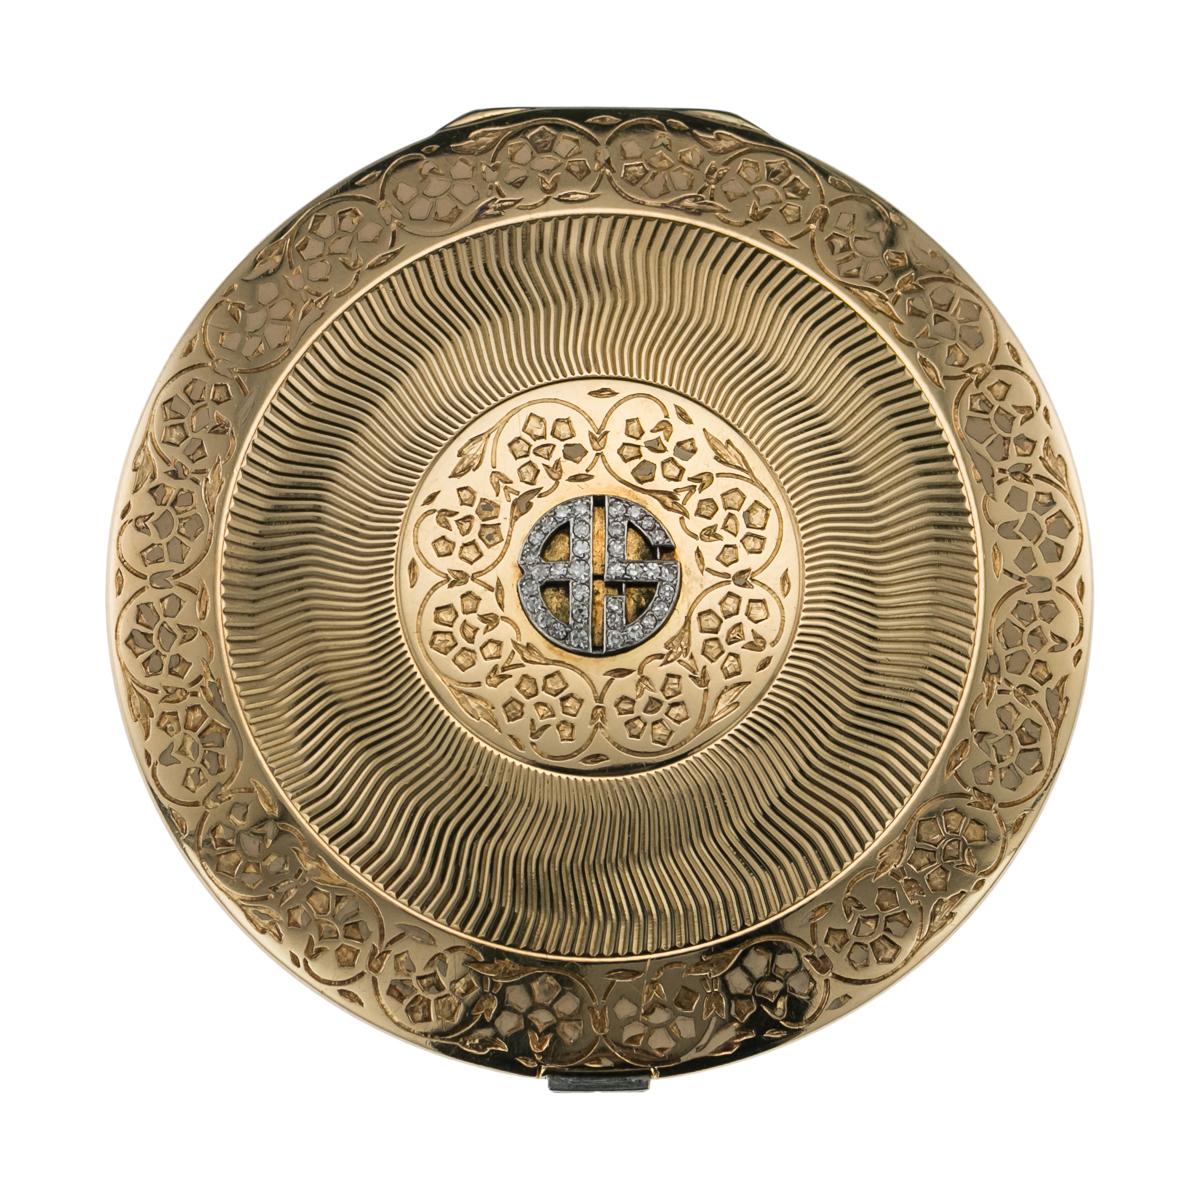 Antique 20th century Cartier Art Deco 18-carat gold compact, of circular form, set with diamond monogram and banquet cut diamonds push-button, both sides are inlaid with floral design champleve' creamy pink enamel and engraved sunburst motif to